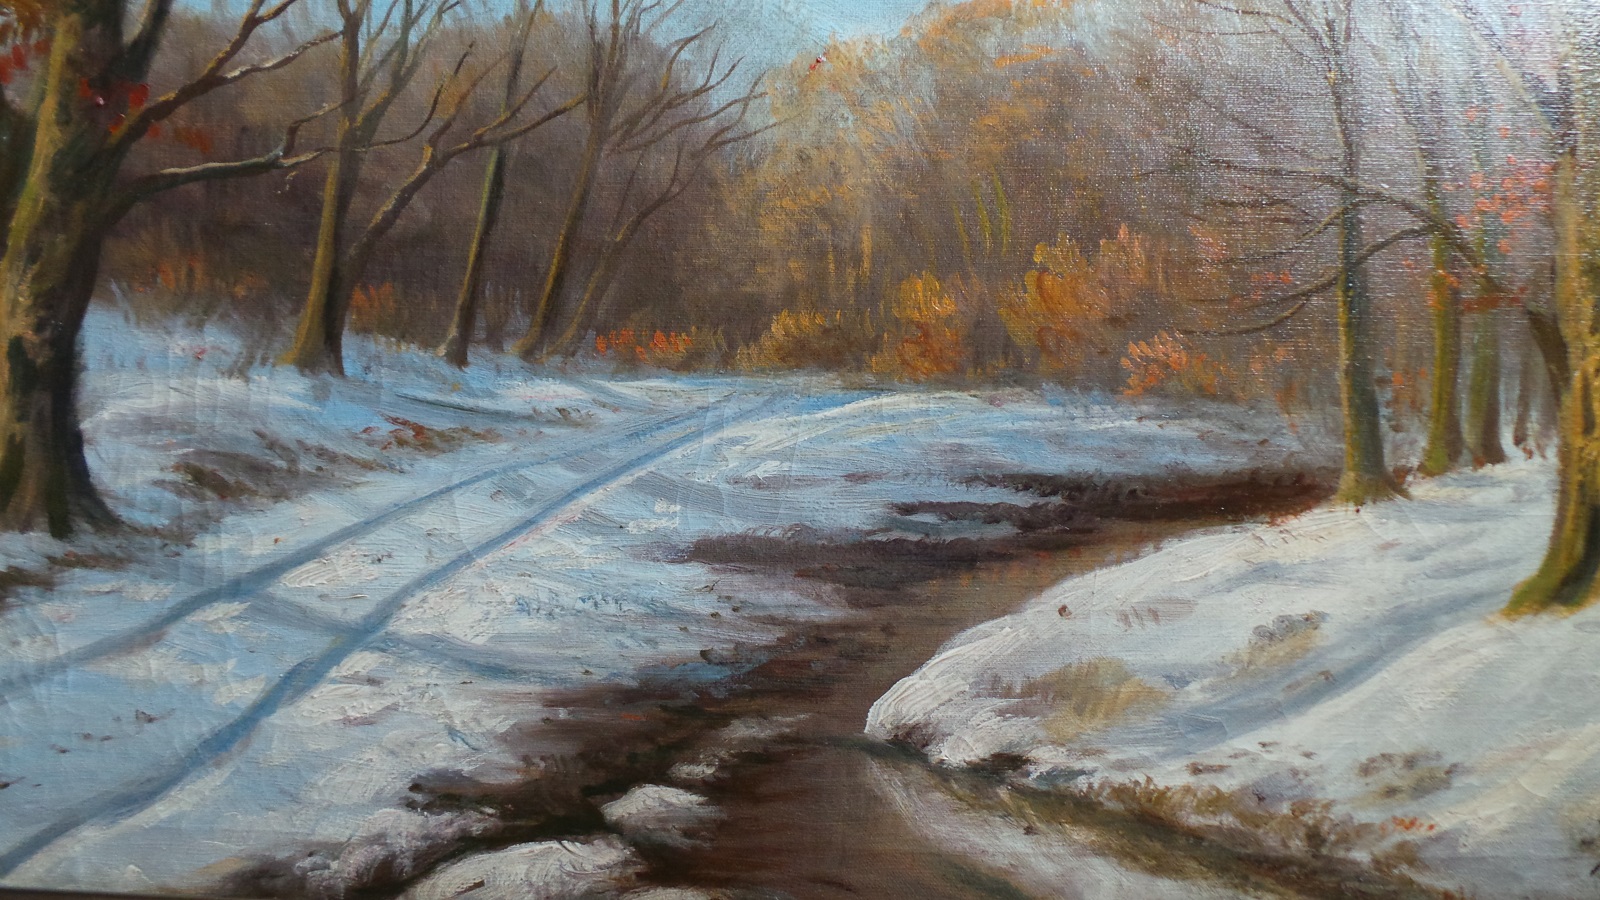 WINTER LANDSCAPE - RIVER IN FOREST. OIL PAINTING BY S. WIIG